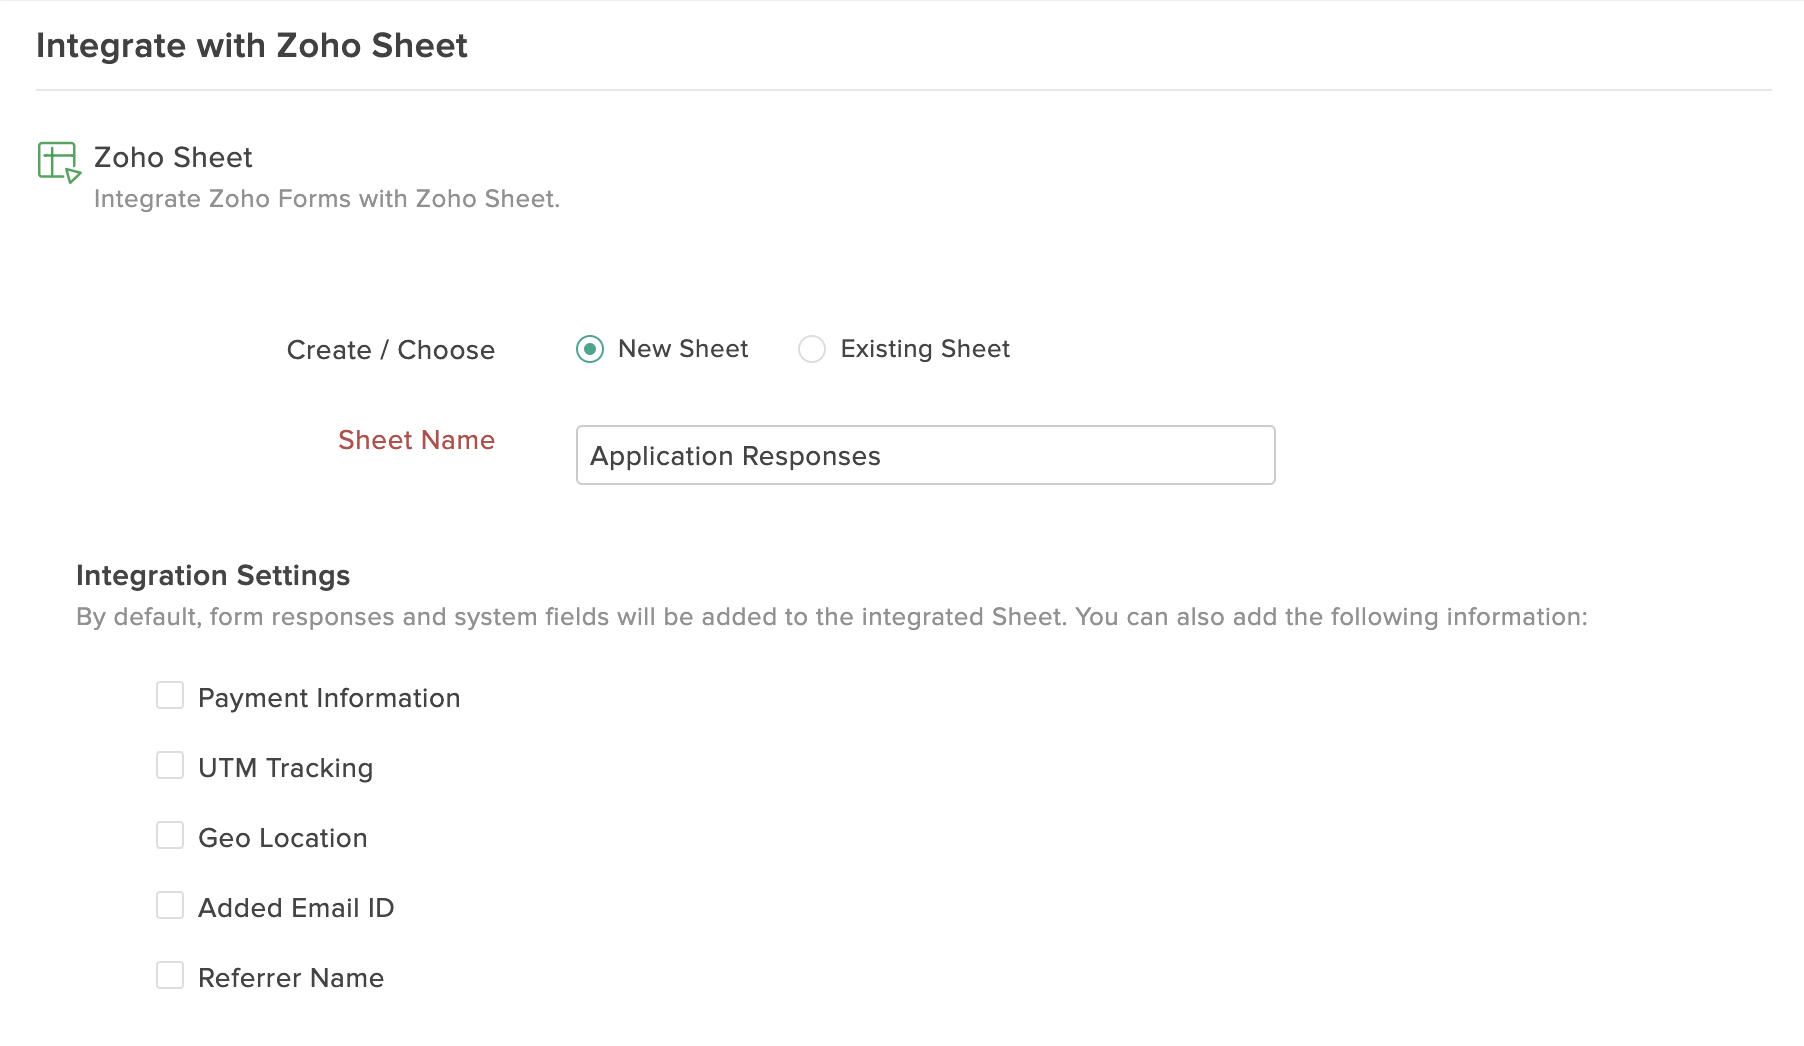 Integration Settings in Zoho Forms - Zoho Sheet Integration